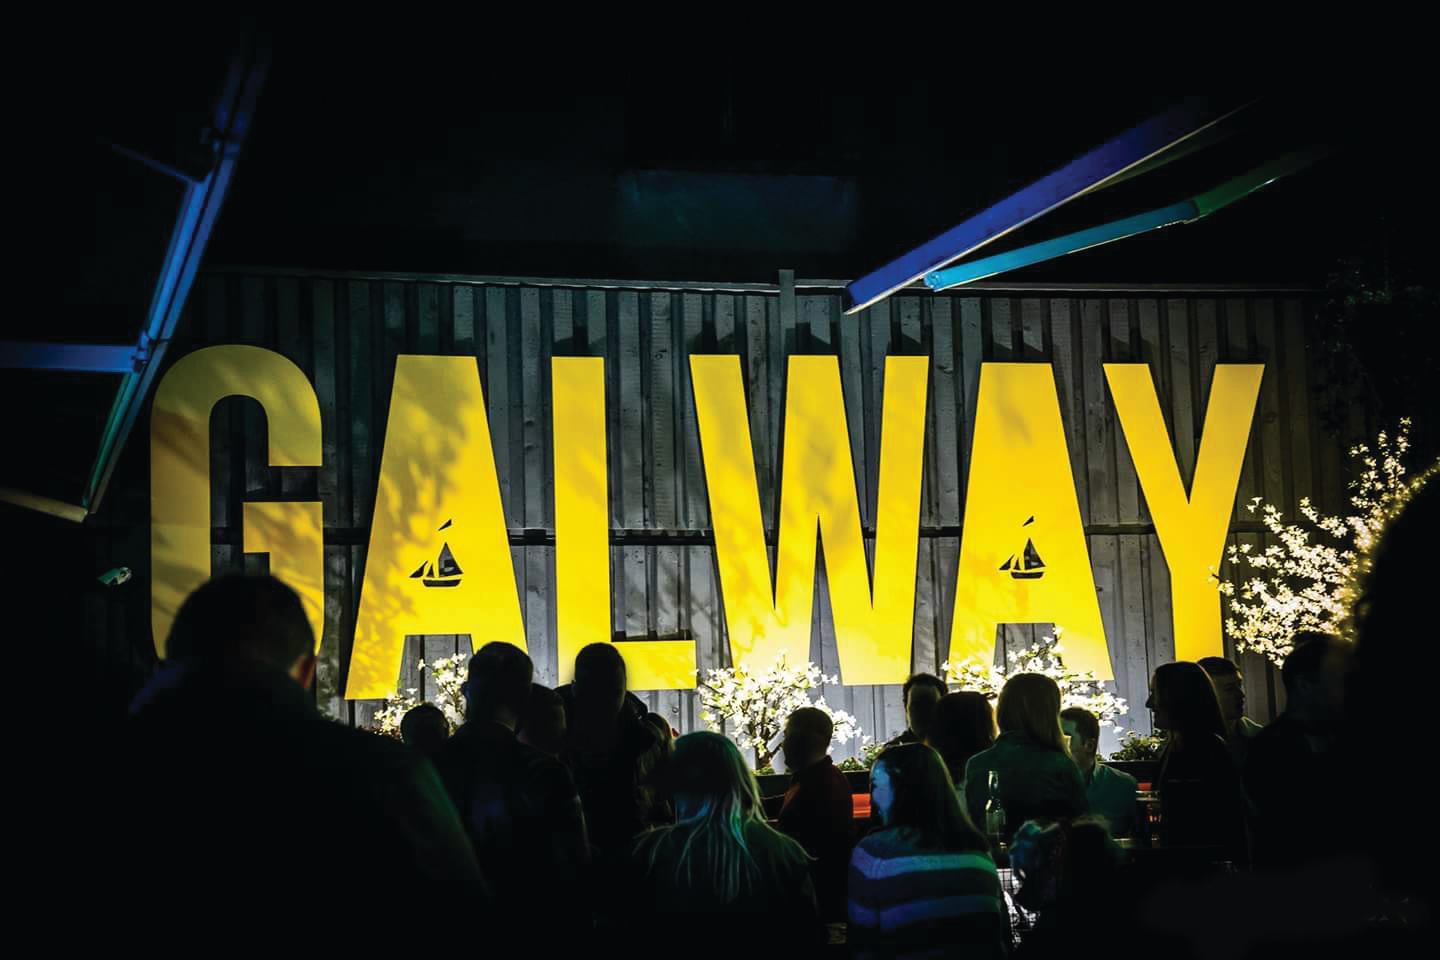 Visit the Best Beer Gardens that Galway has to offer